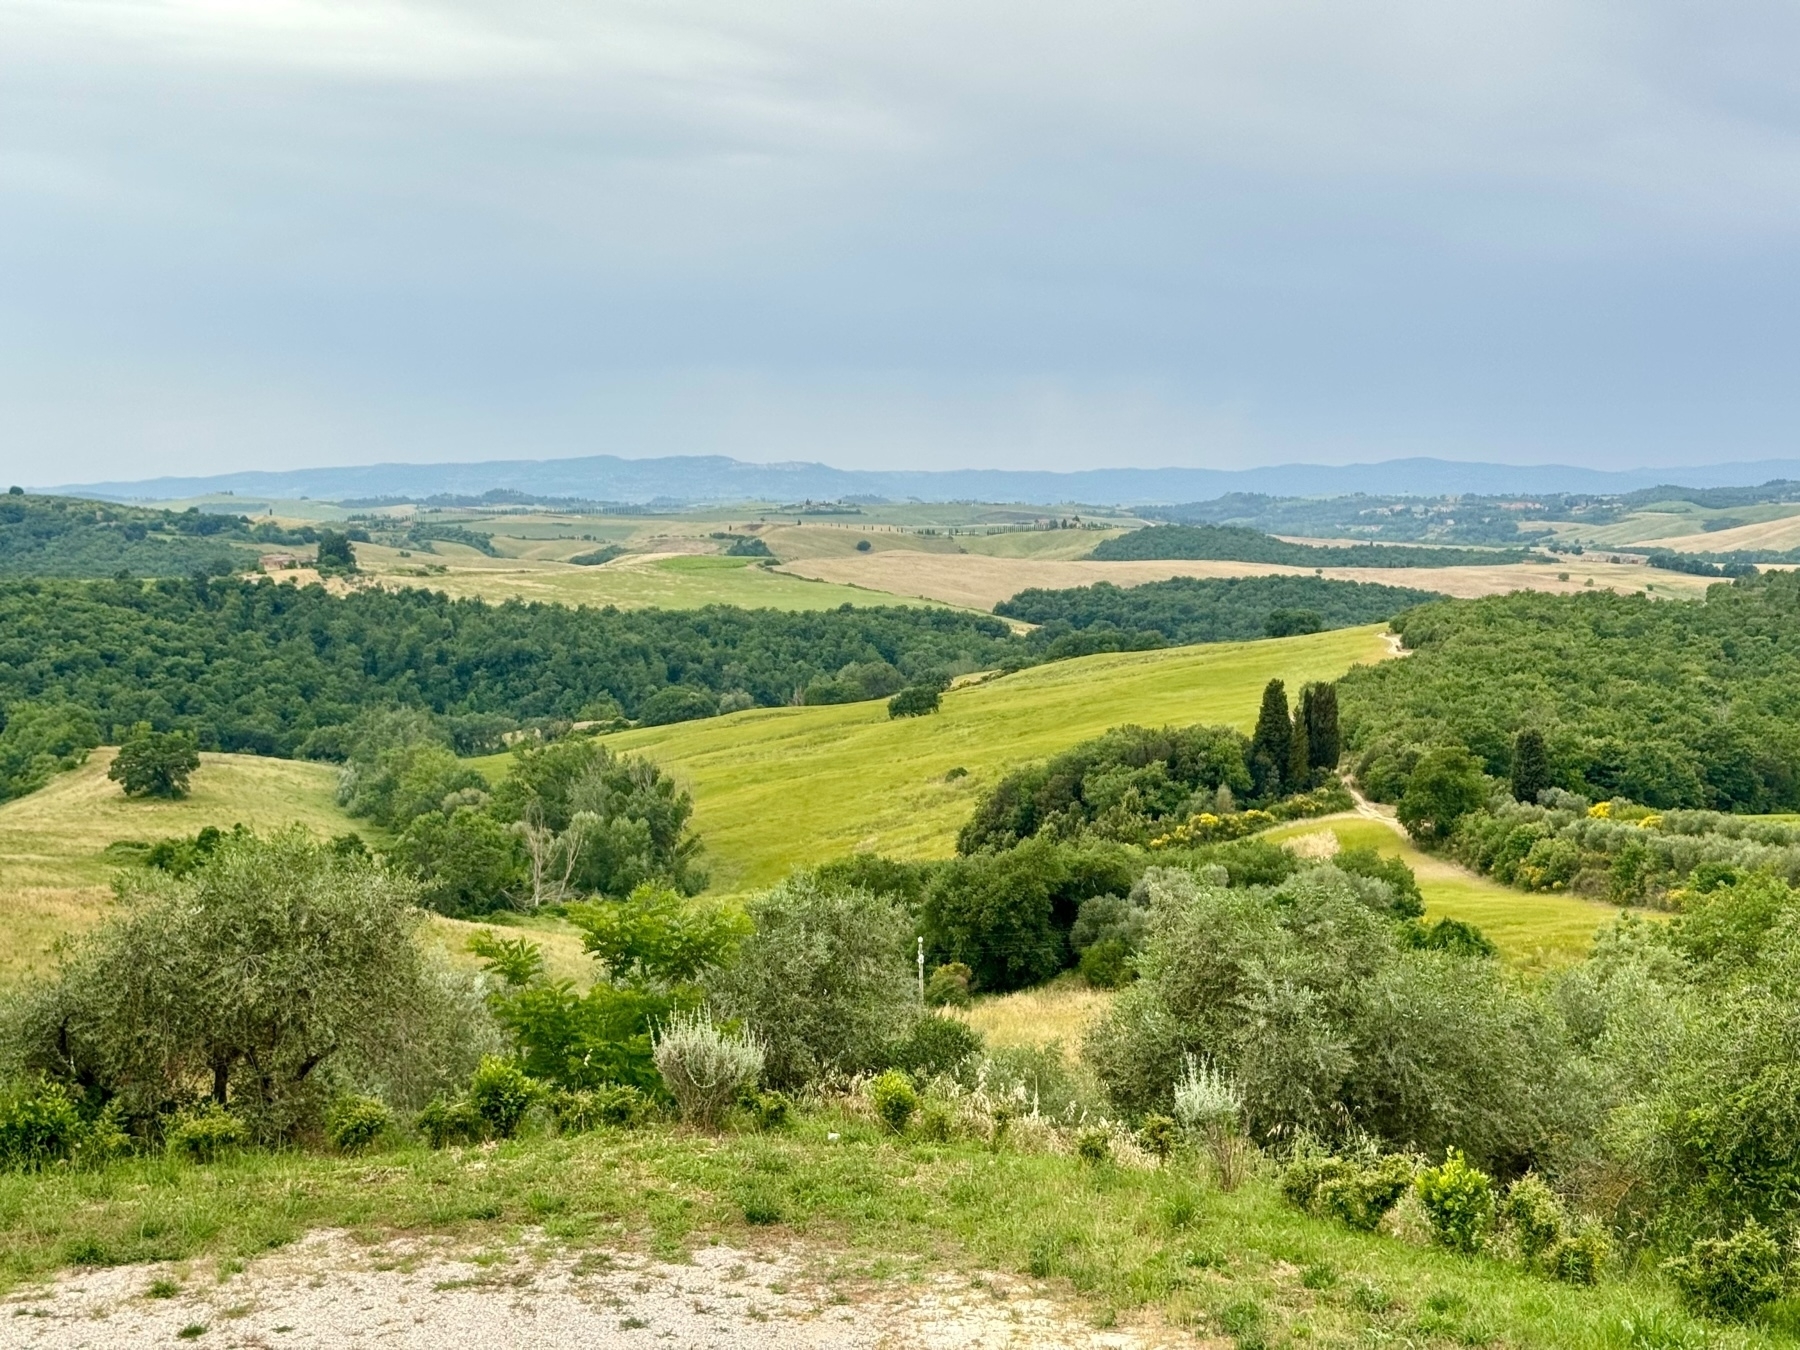 Rolling countryside with green fields and wooded areas under a cloudy sky. Dirt paths weave through the landscape, and distant hills are visible on the horizon. A serene, natural setting.